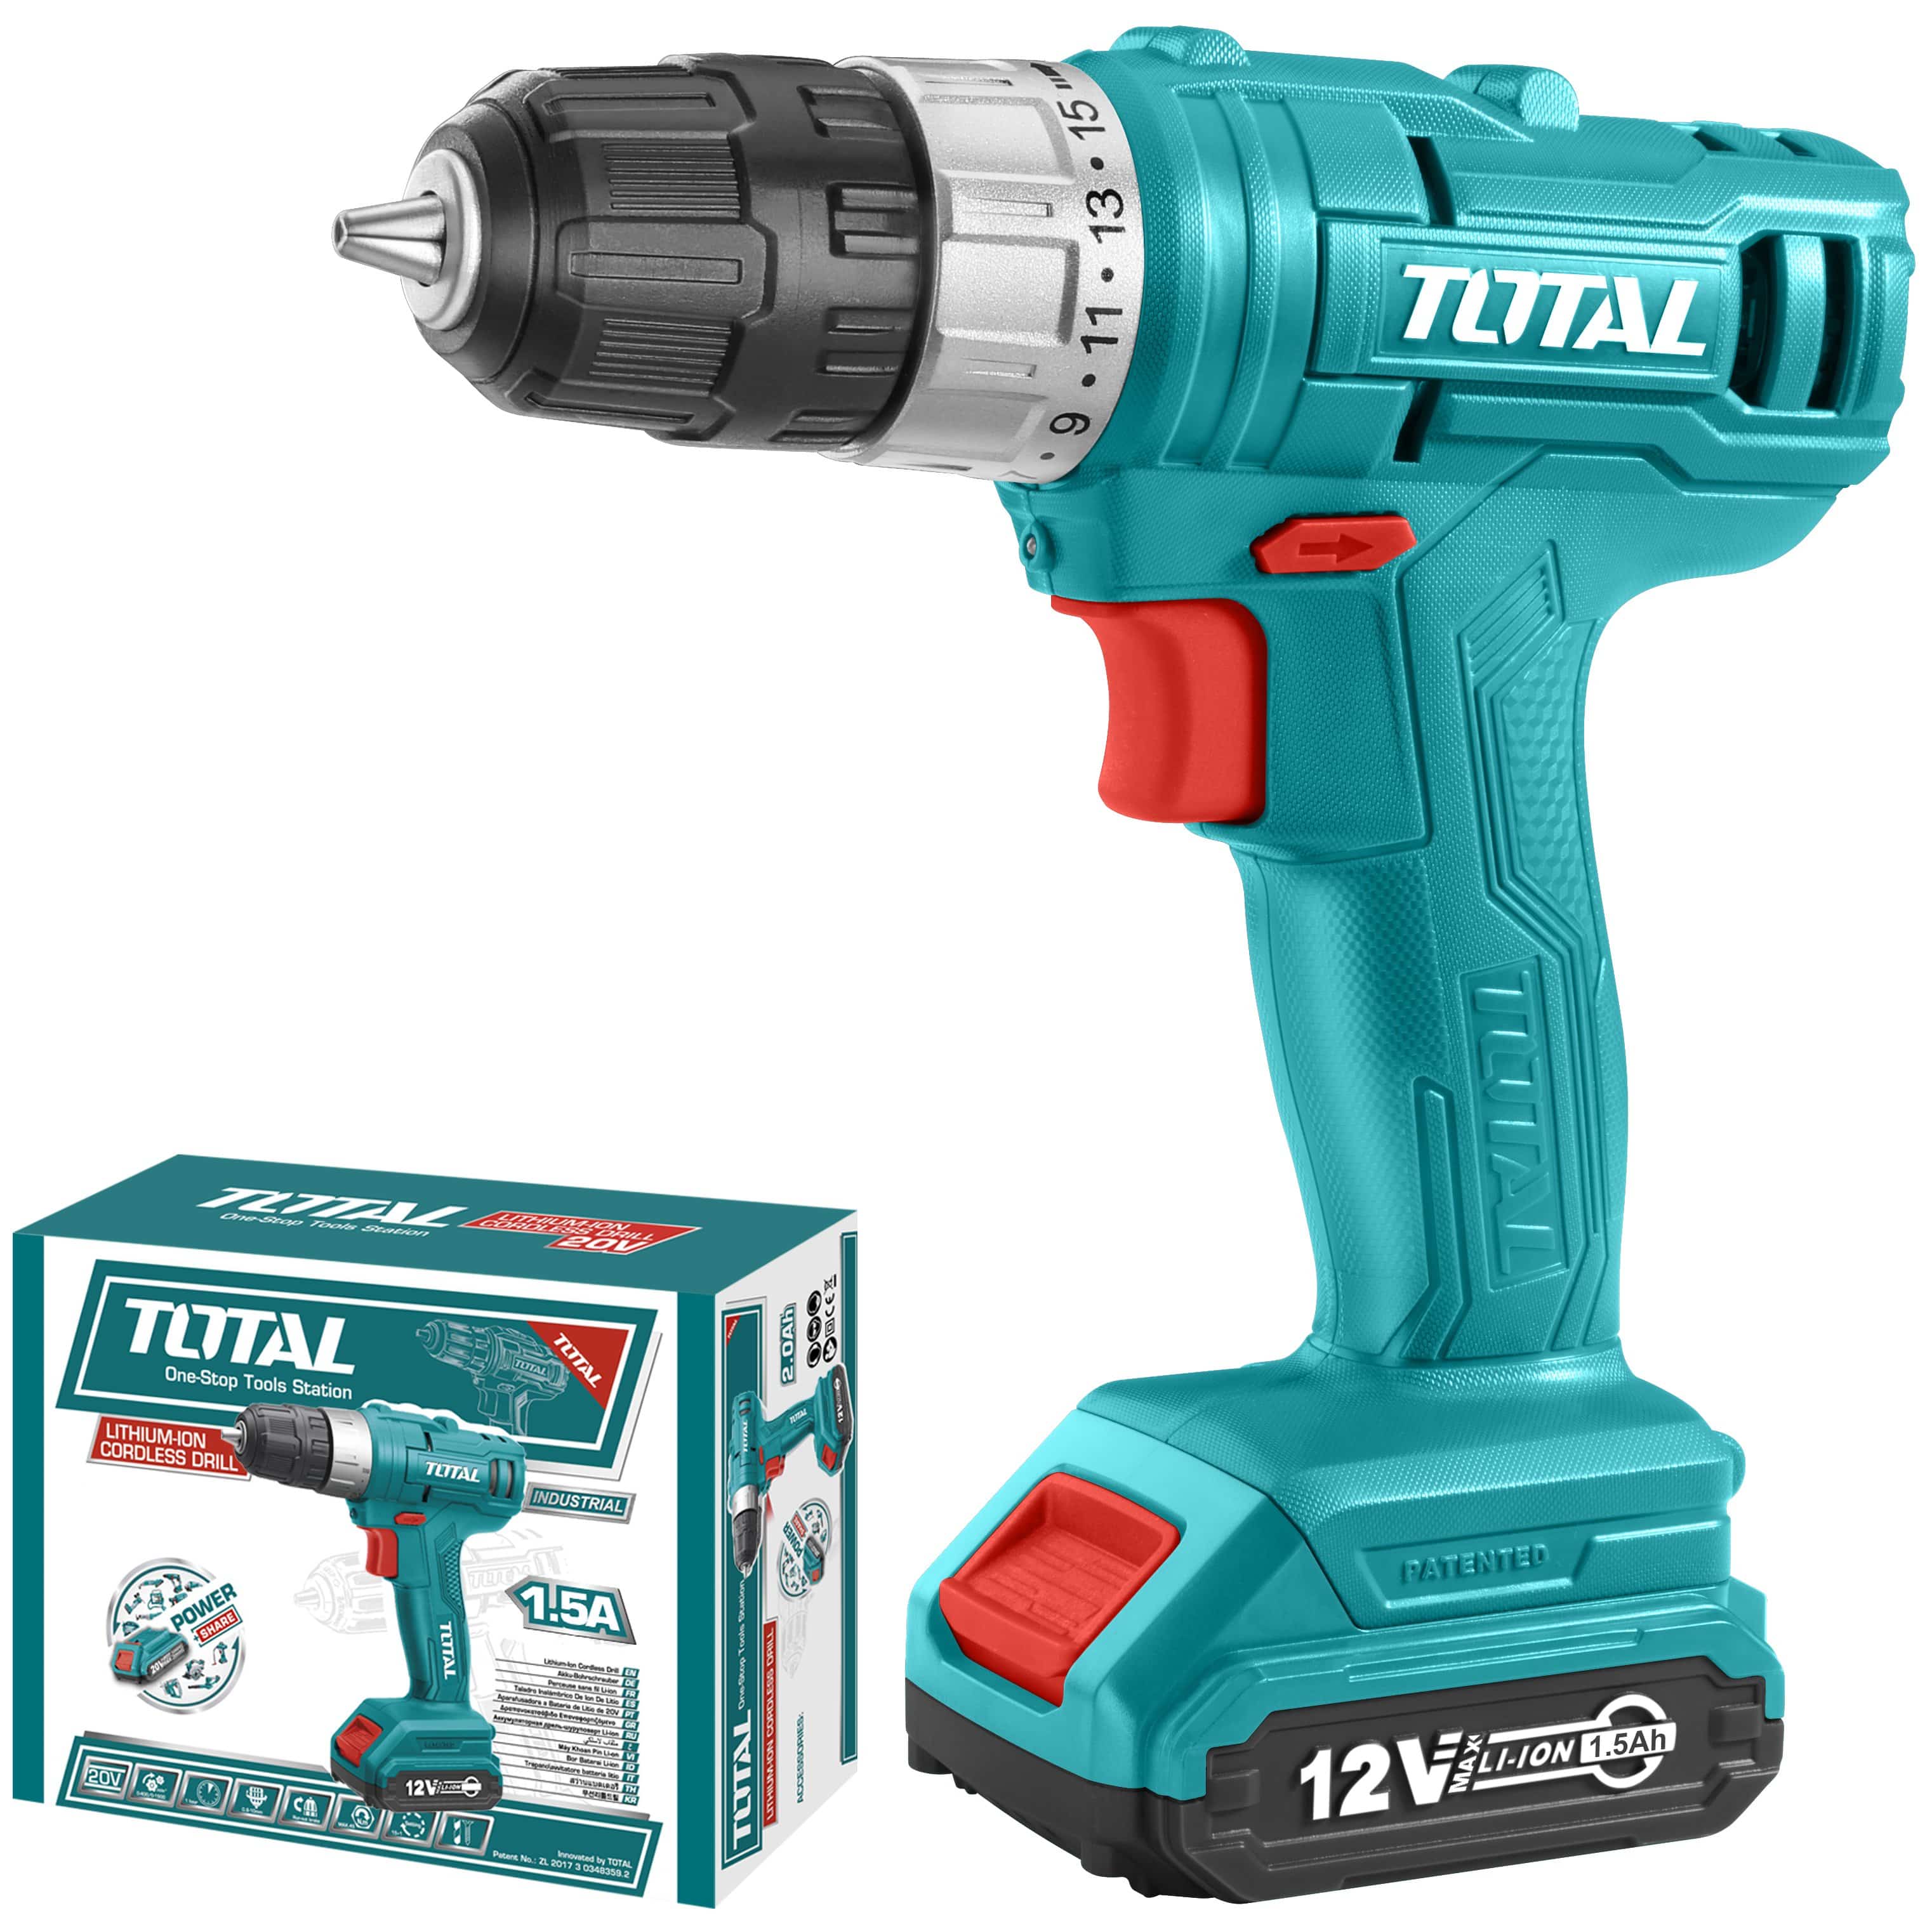 Total Lithium-Ion Cordless Drill 12V with Two Batteries - TDLI122 | Supply Master | Accra, Ghana Tools Building Steel Engineering Hardware tool